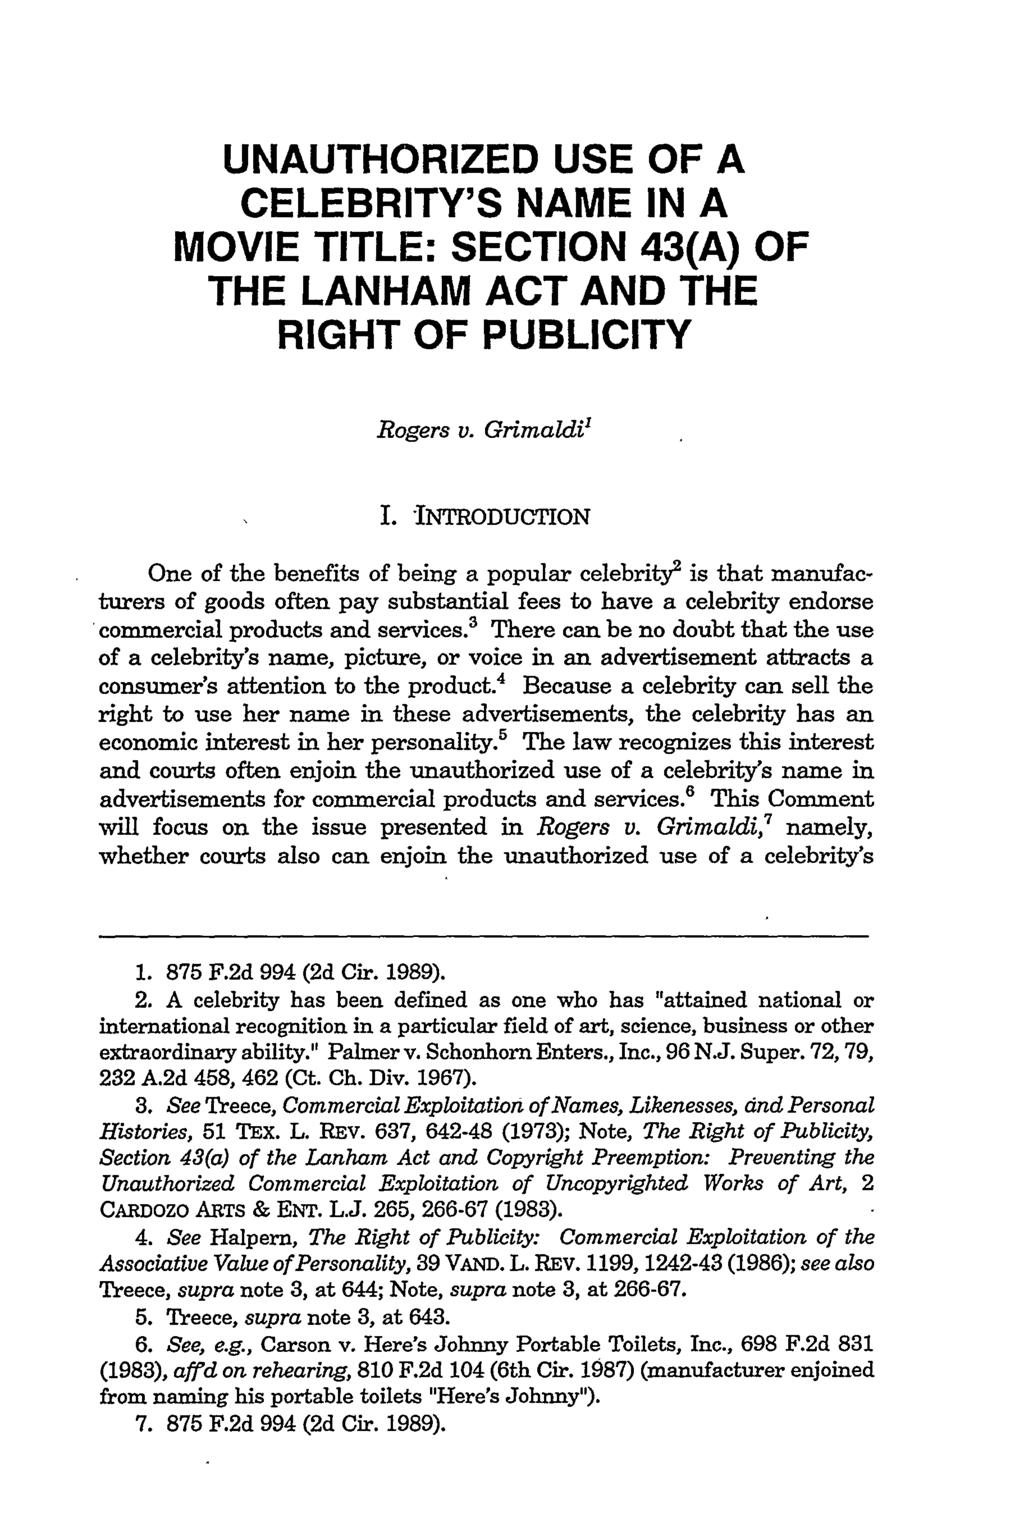 Wawrzyniak: Wawrzyniak: Unauthorized Use of Celebrity's Name UNAUTHORIZED USE OF A CELEBRITY'S NAME IN A MOVIE TITLE: SECTION 43(A) OF THE LANHAM ACT AND THE RIGHT OF PUBLICITY Rogers v. Grimaldi' I.